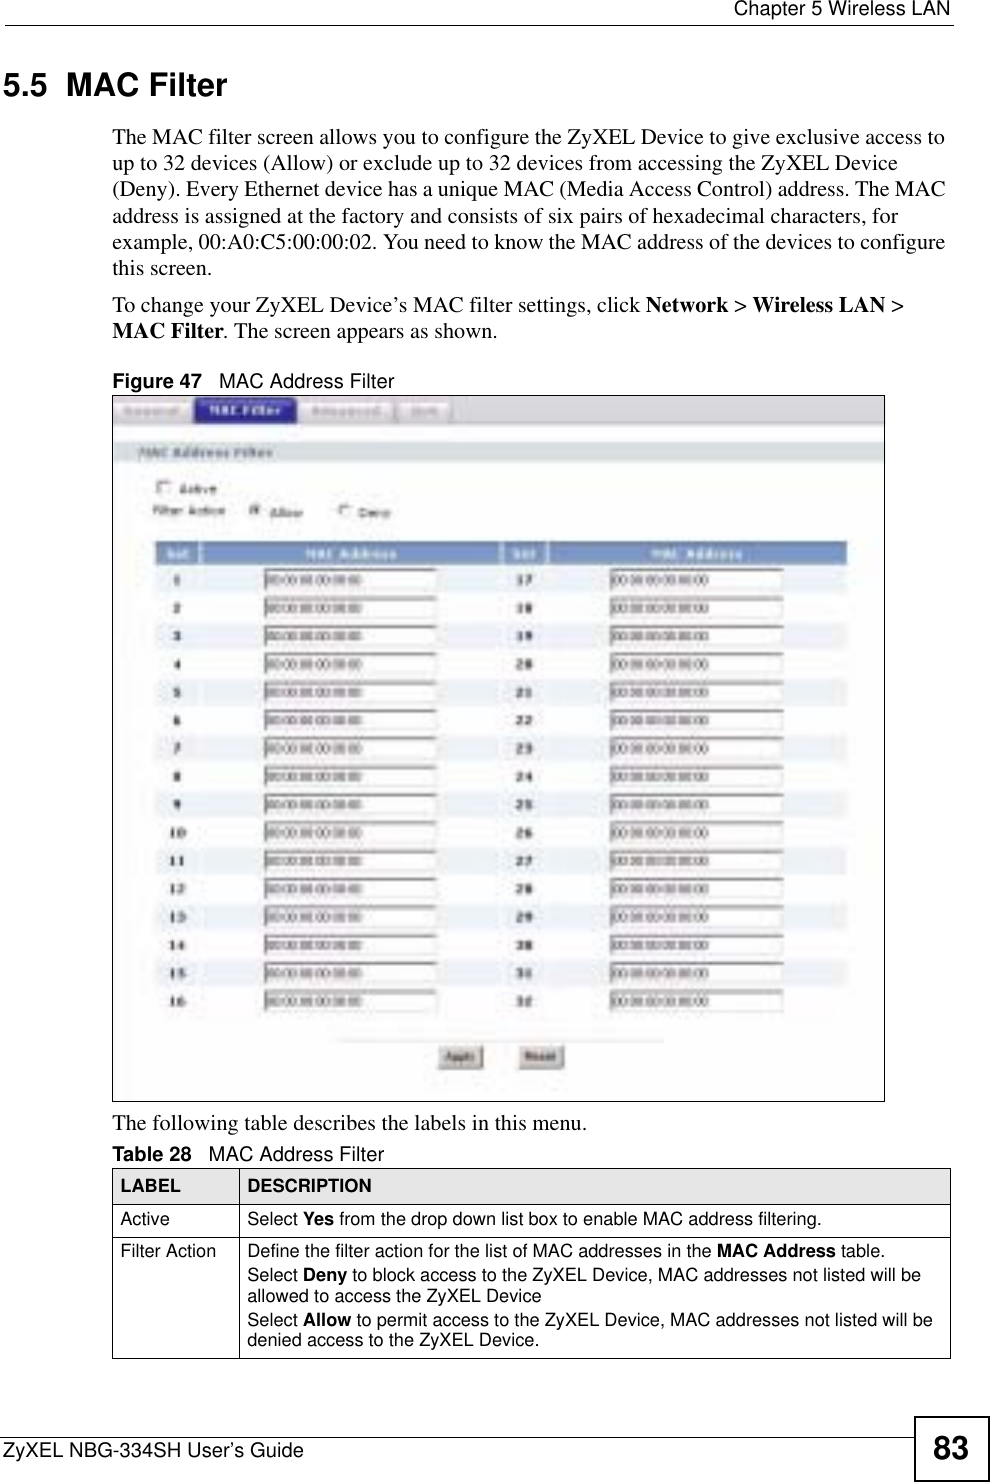  Chapter 5 Wireless LANZyXEL NBG-334SH User’s Guide 835.5  MAC FilterThe MAC filter screen allows you to configure the ZyXEL Device to give exclusive access to up to 32 devices (Allow) or exclude up to 32 devices from accessing the ZyXEL Device (Deny). Every Ethernet device has a unique MAC (Media Access Control) address. The MAC address is assigned at the factory and consists of six pairs of hexadecimal characters, for example, 00:A0:C5:00:00:02. You need to know the MAC address of the devices to configure this screen.To change your ZyXEL Device’s MAC filter settings, click Network &gt; Wireless LAN &gt; MAC Filter. The screen appears as shown.Figure 47   MAC Address FilterThe following table describes the labels in this menu.Table 28   MAC Address FilterLABEL DESCRIPTIONActive Select Yes from the drop down list box to enable MAC address filtering.Filter Action  Define the filter action for the list of MAC addresses in the MAC Address table. Select Deny to block access to the ZyXEL Device, MAC addresses not listed will be allowed to access the ZyXEL Device Select Allow to permit access to the ZyXEL Device, MAC addresses not listed will be denied access to the ZyXEL Device. 